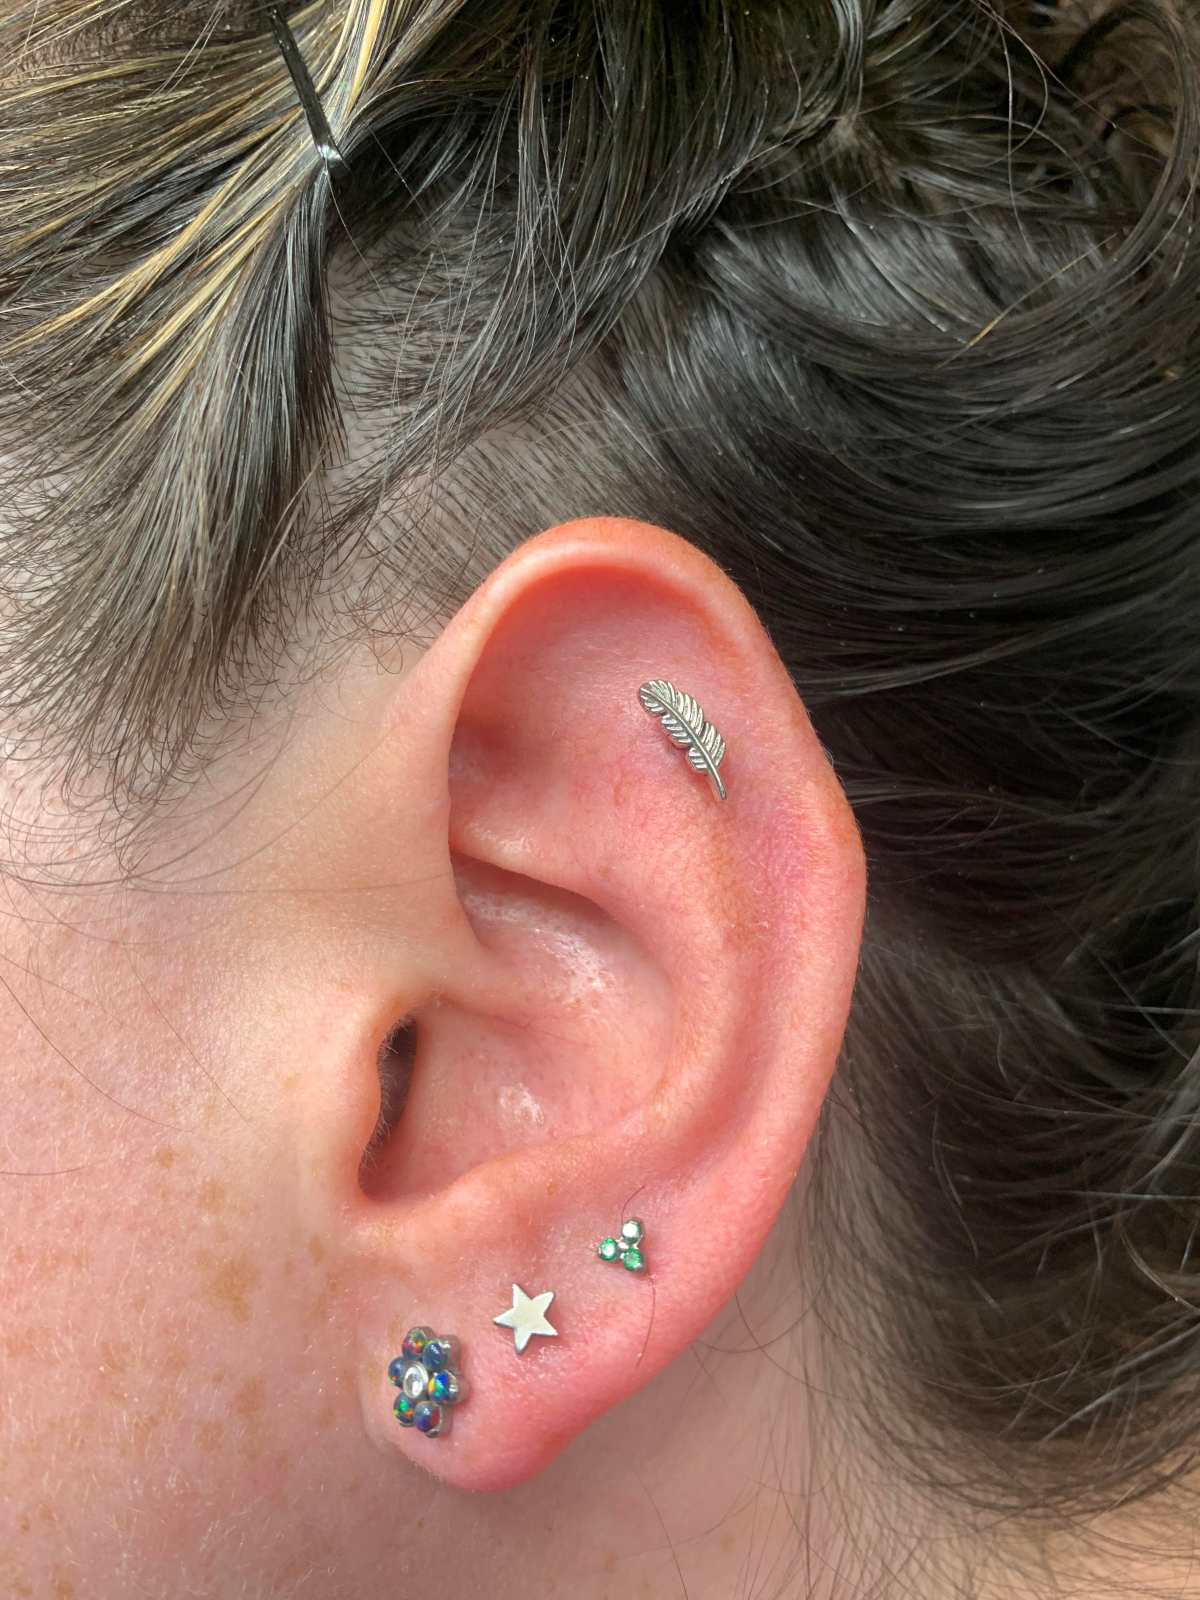 how long does a flat piercing take to heal